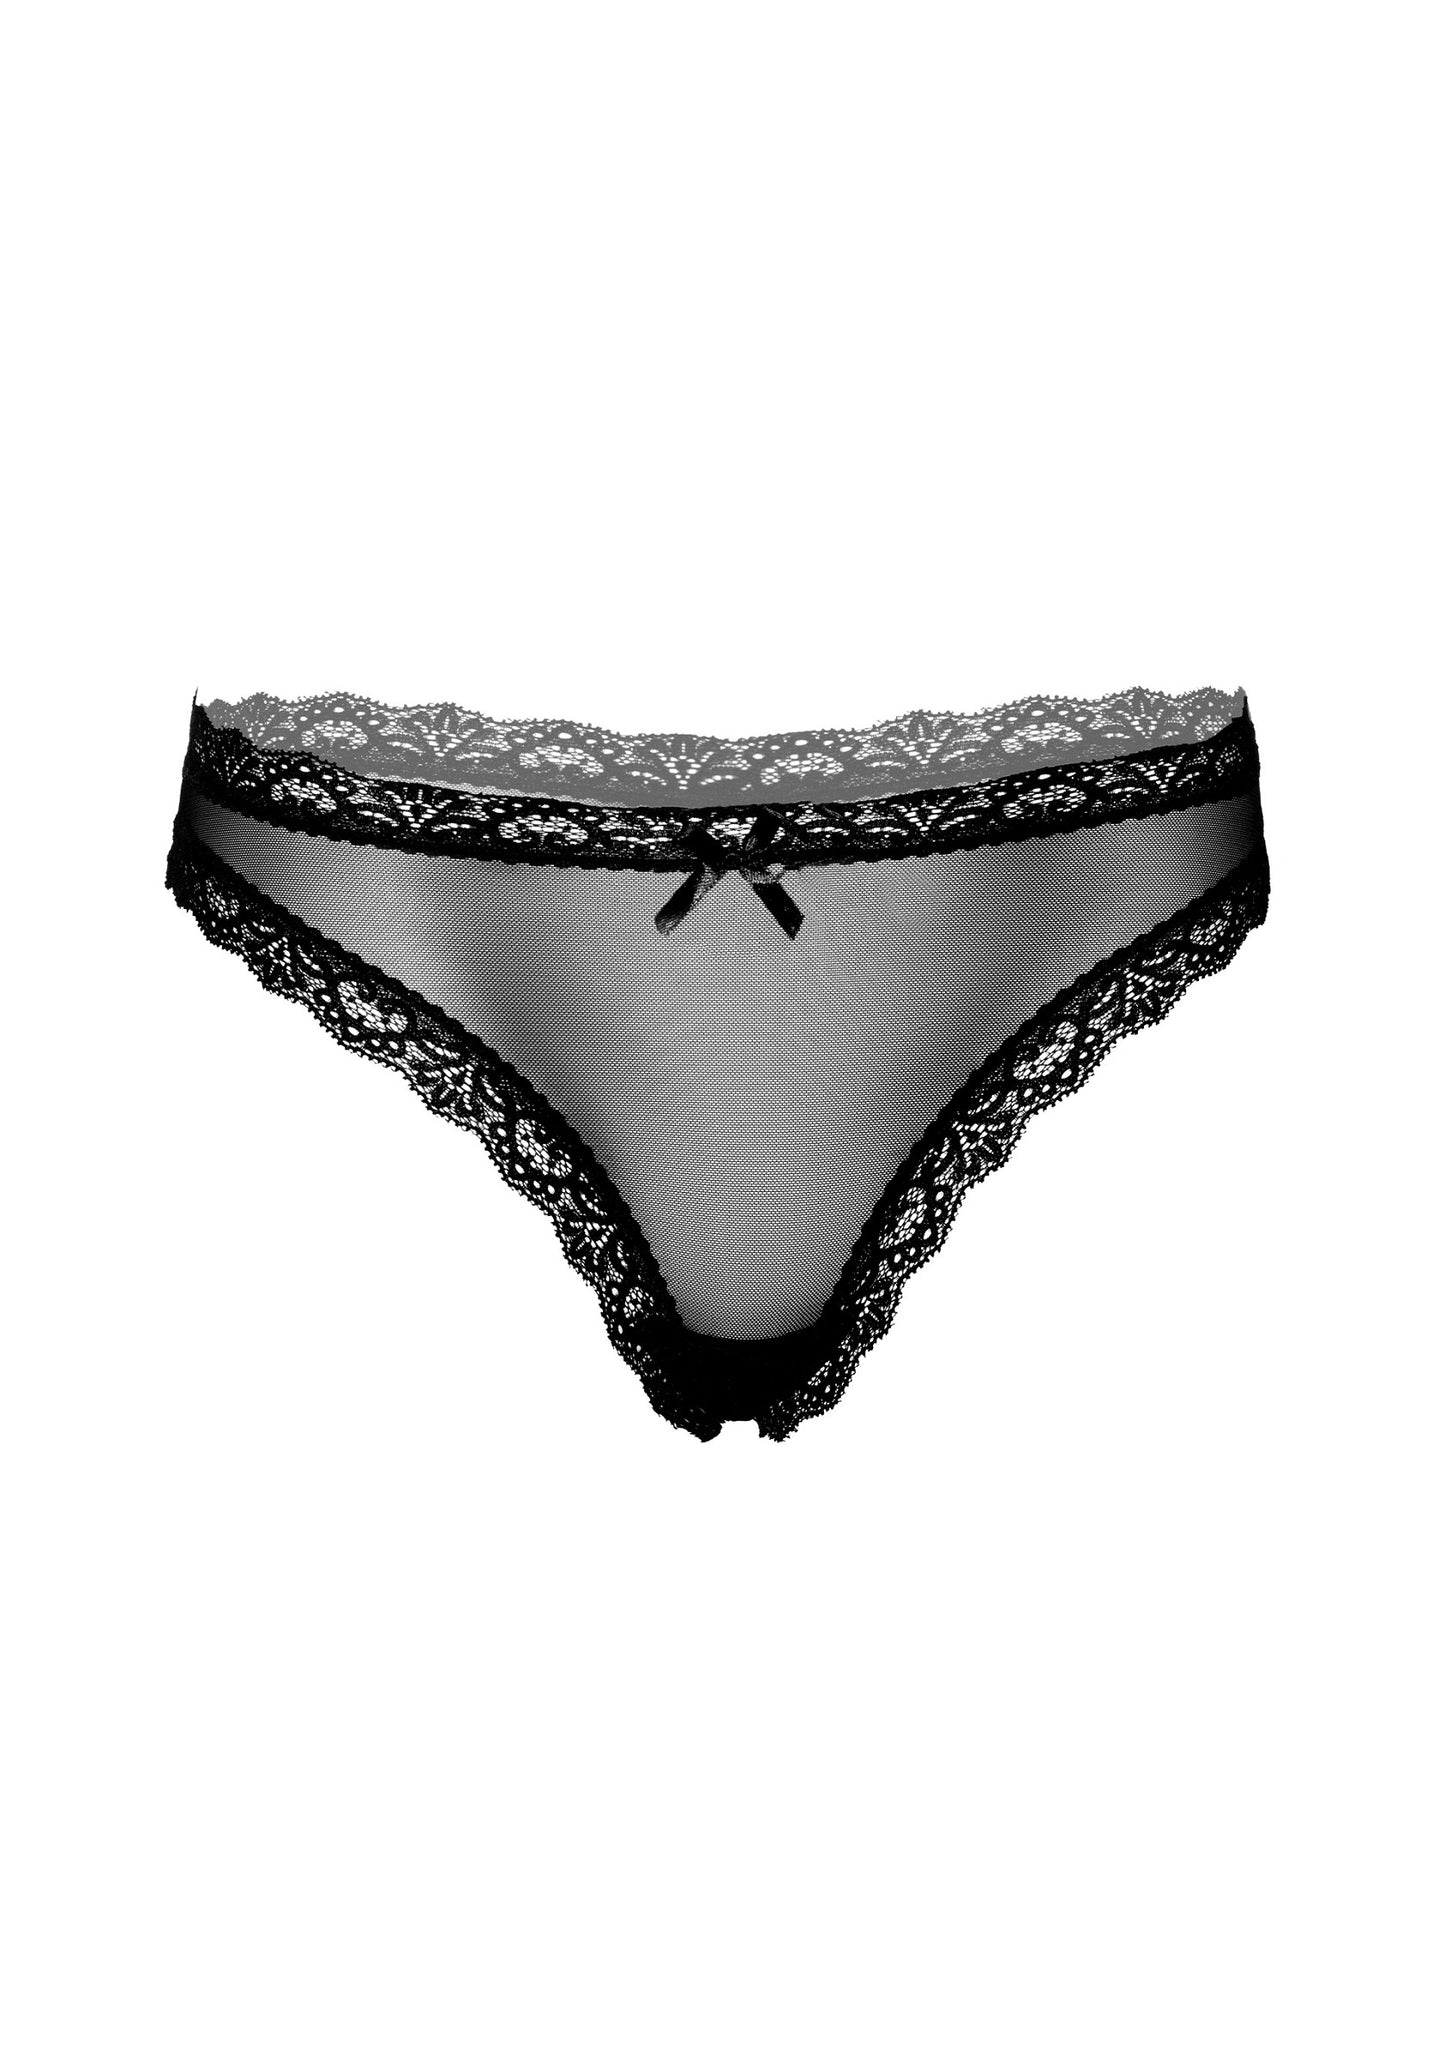 Daring Intimates Mix & Match Mesh thong with ruched-back BLACK S/M - 7